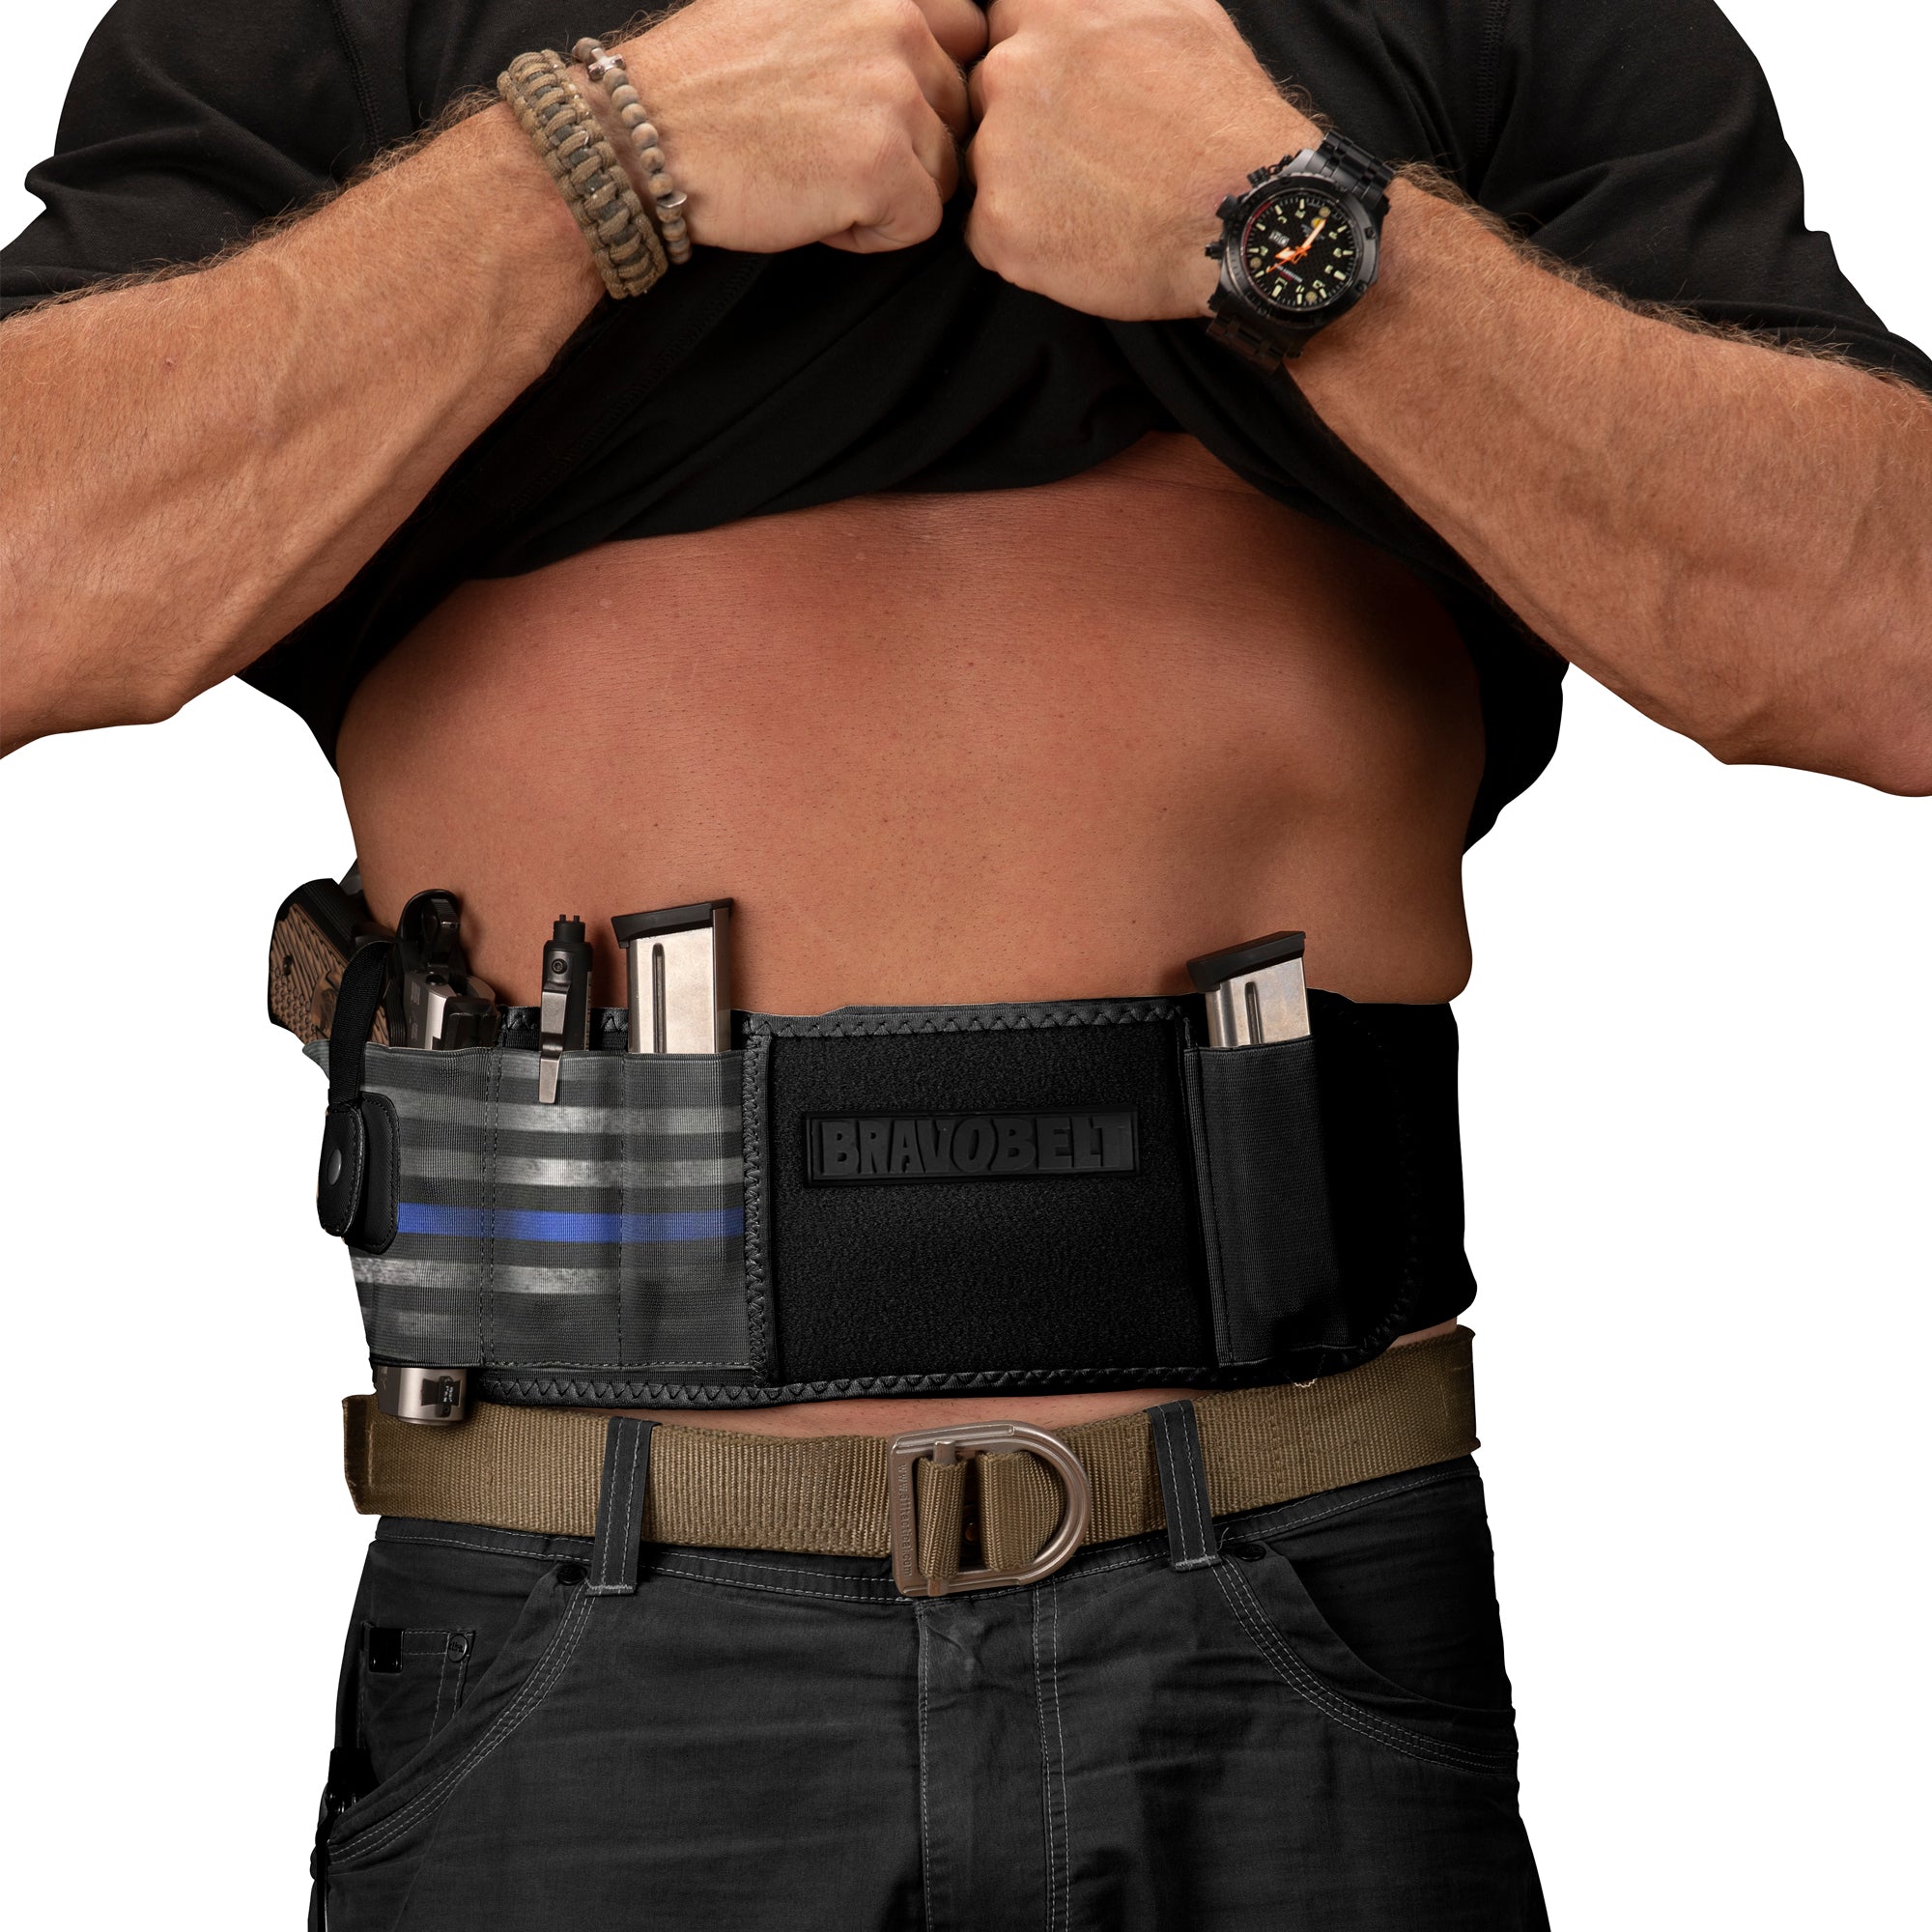 Buy BRAVOBELT Belly Band Holster for Concealed Carry - Athletic Flex FIT  for Running, Jogging, Hiking - Glock 17-43 Ruger S&W M&P 40 Shield